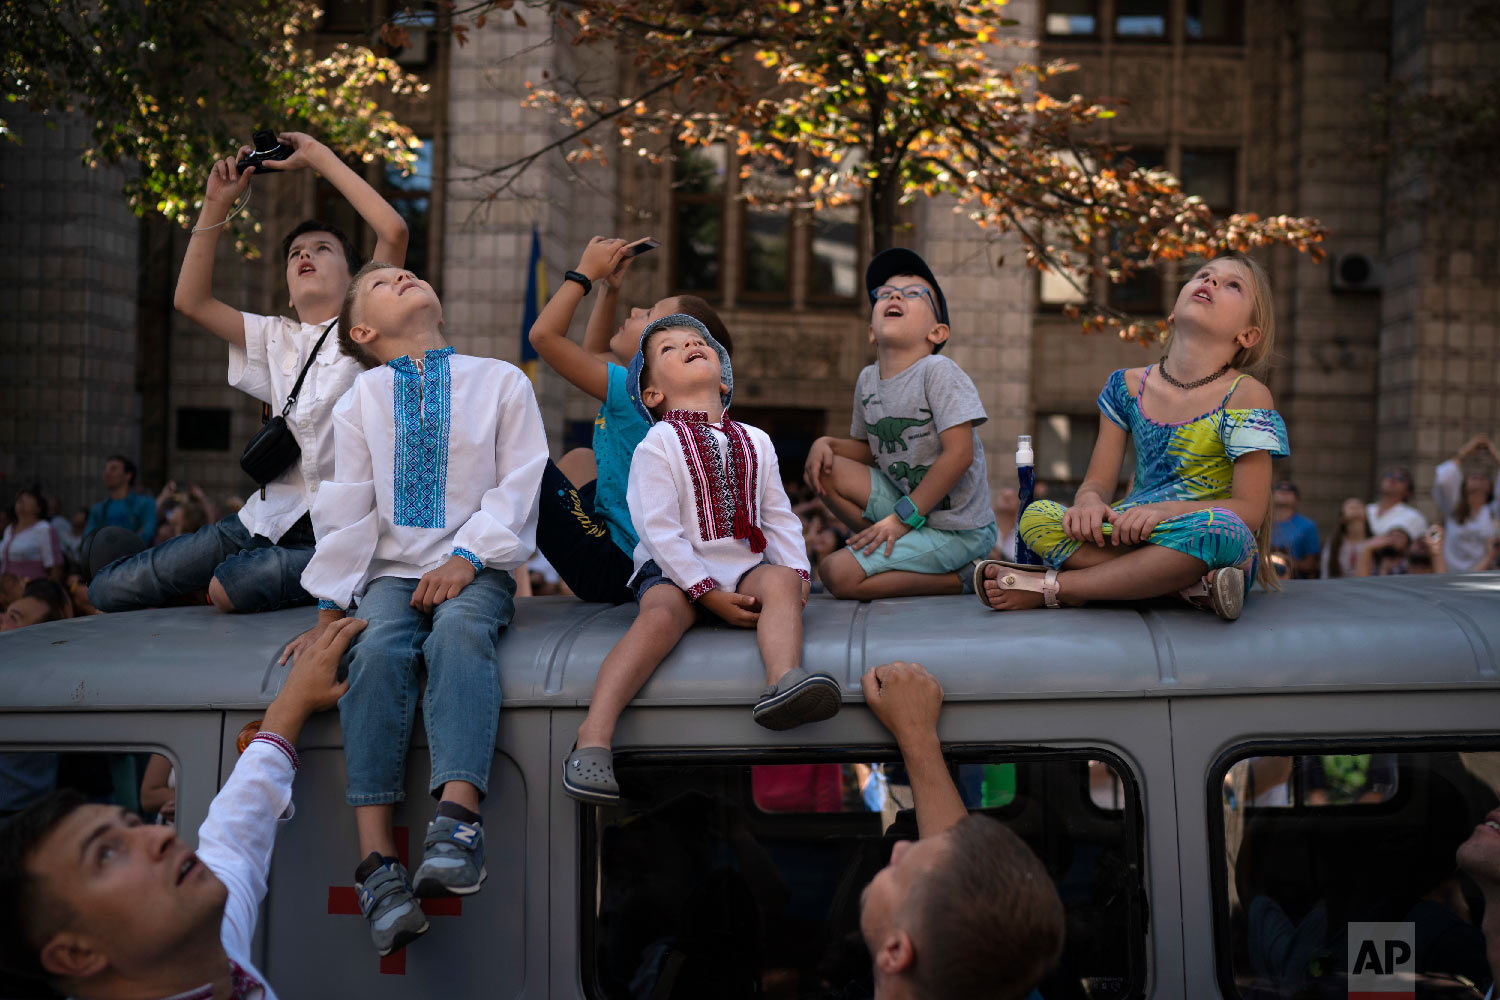  Children look up as military aircrafts fly above the city center during a military parade to celebrate Independence Day in Kiev, Ukraine on Aug. 24, 2018. (AP Photo/Felipe Dana) 